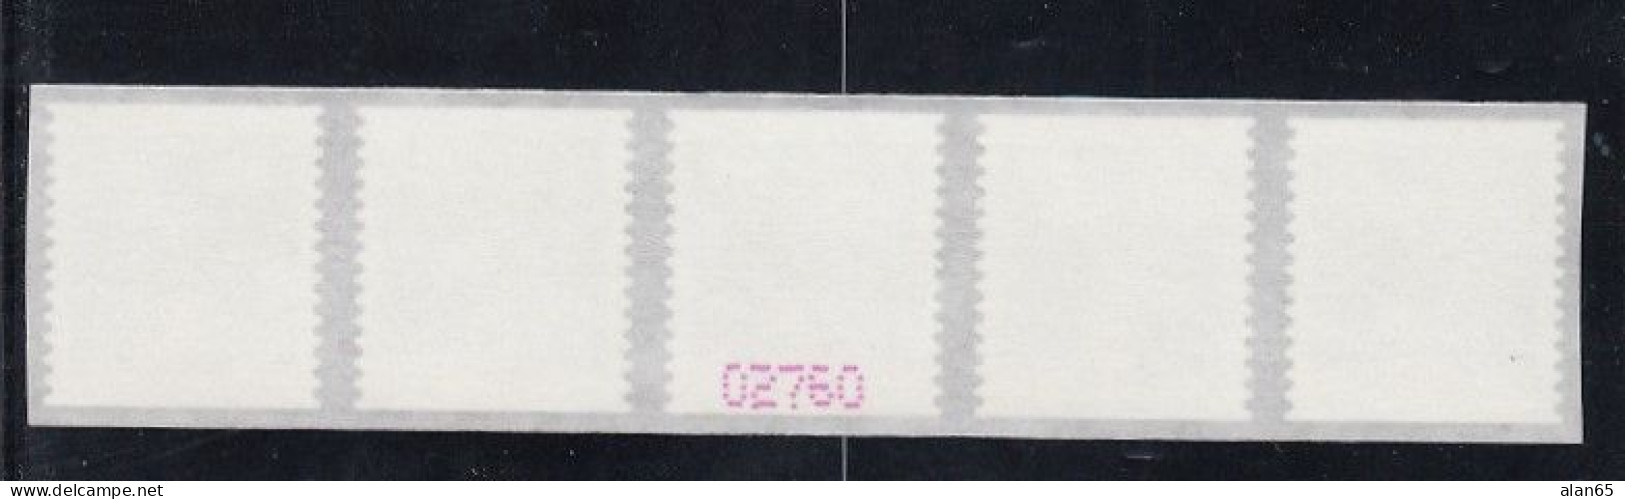 Sc#4496, Patriotic Quill And Inkwell, 2011 Issue, 44-cent Stamp Plate # Strip Of 5 - Numéros De Planches